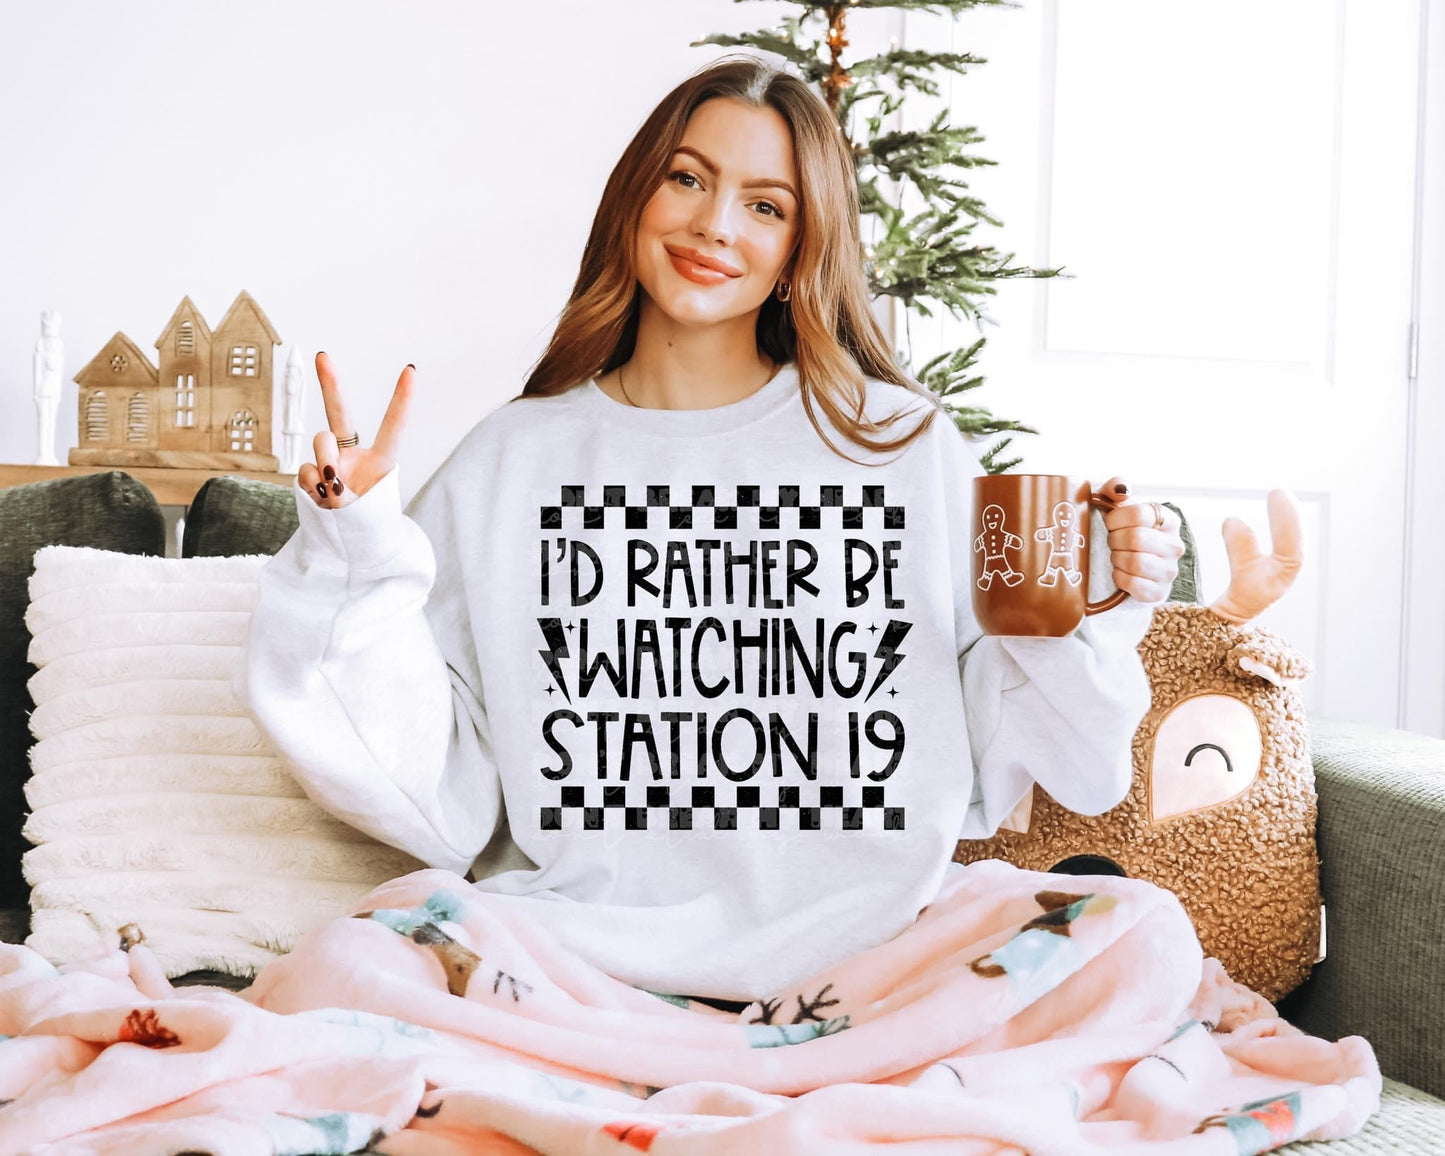 I’D RATHER BE WATCHING STATION 19 SINGLE COLOR DIGITAL